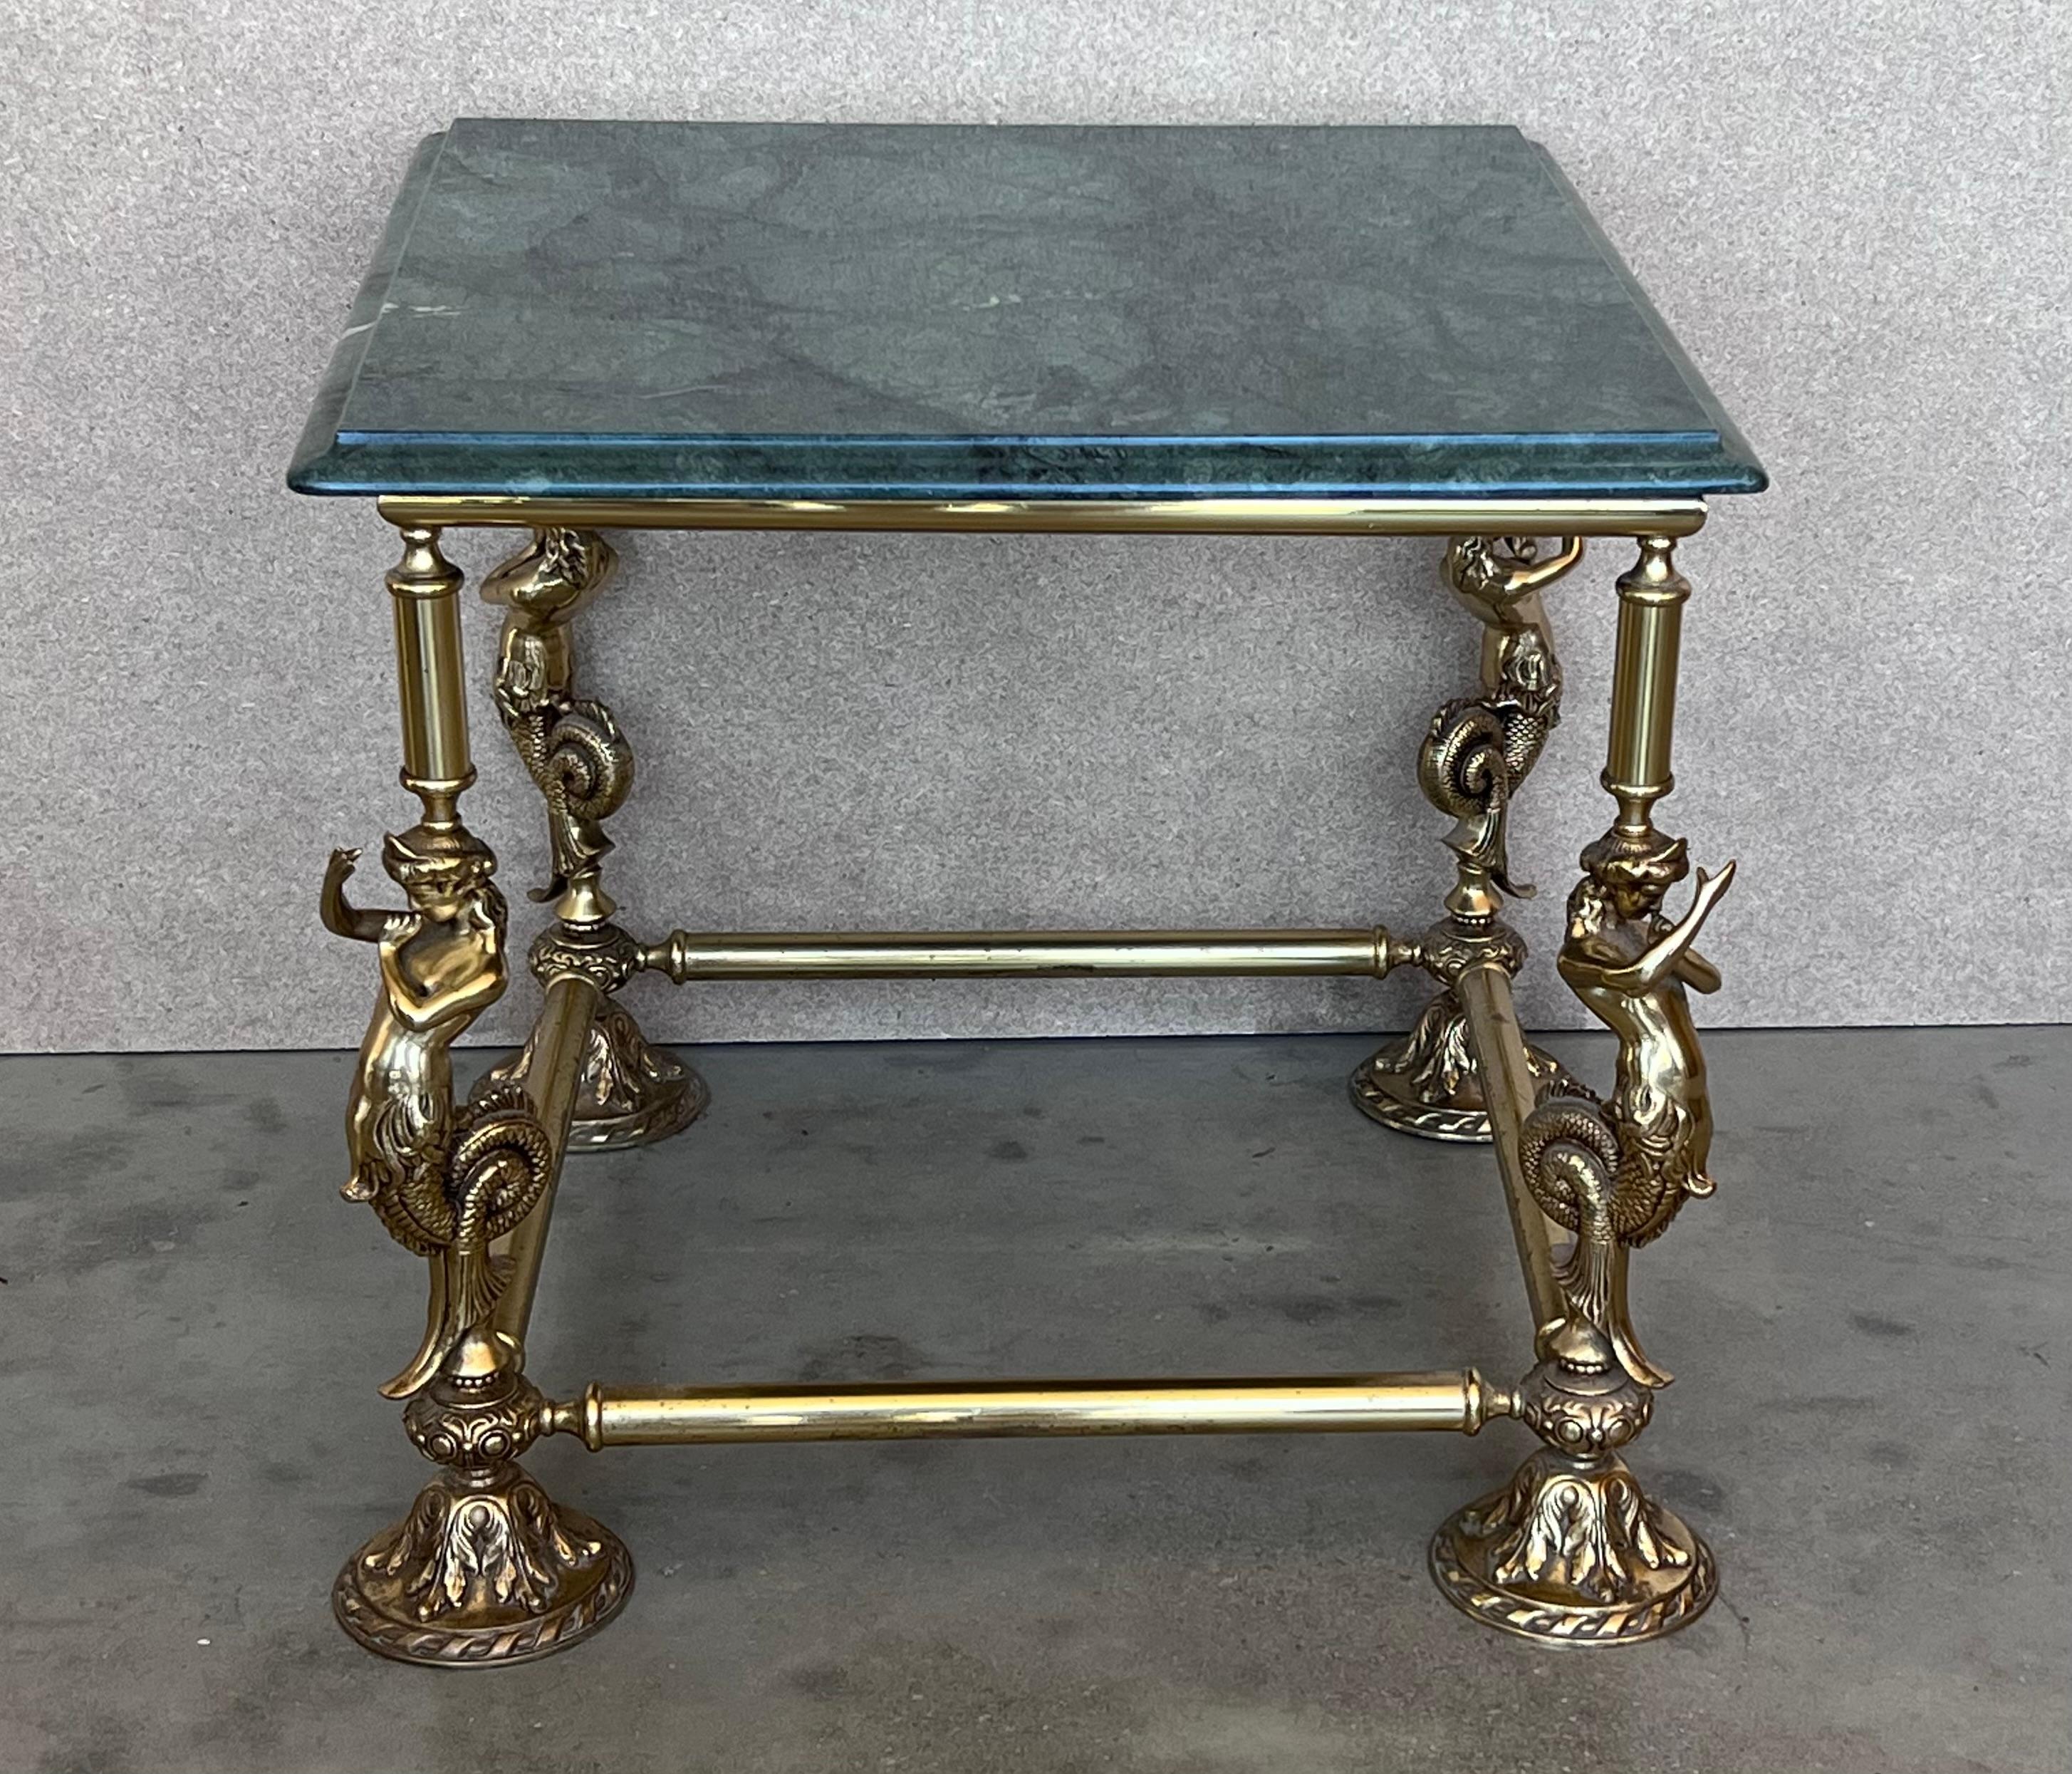 Neoclassical Italian Bronze Square Side Table with Green Marble Top, circa 1845 For Sale